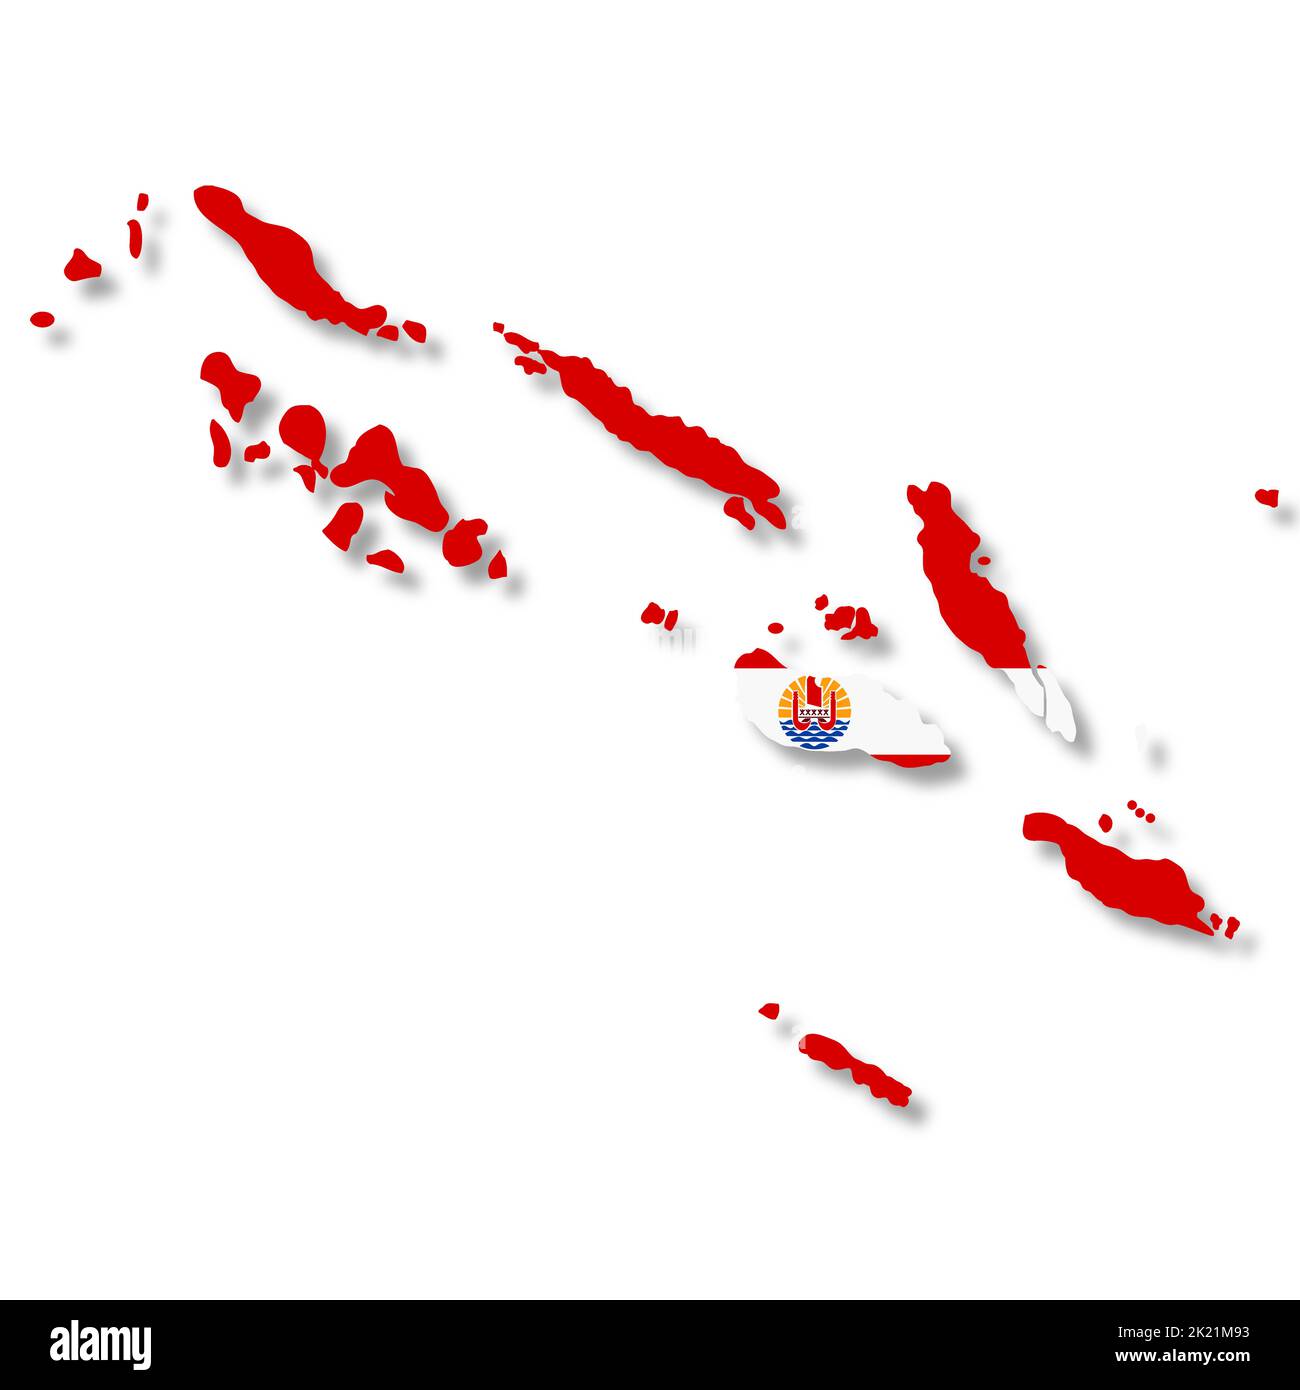 A French Polynesia map on white background with clipping path to remove shadow 3d illustration Stock Photo